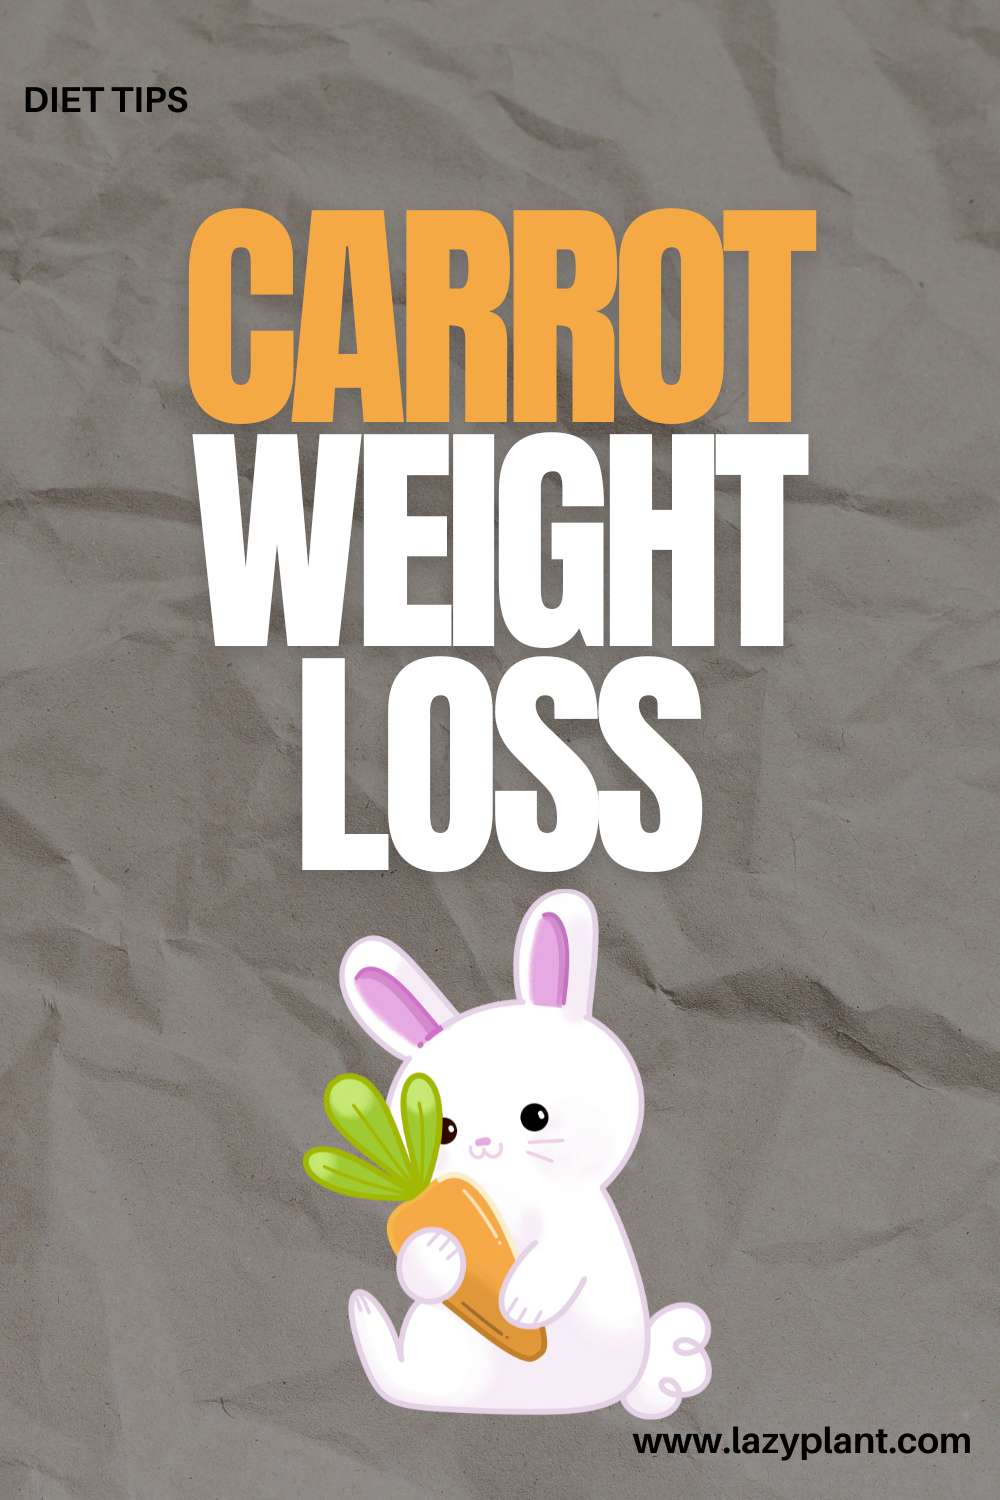 Carrots are your Superfood for Weight Loss